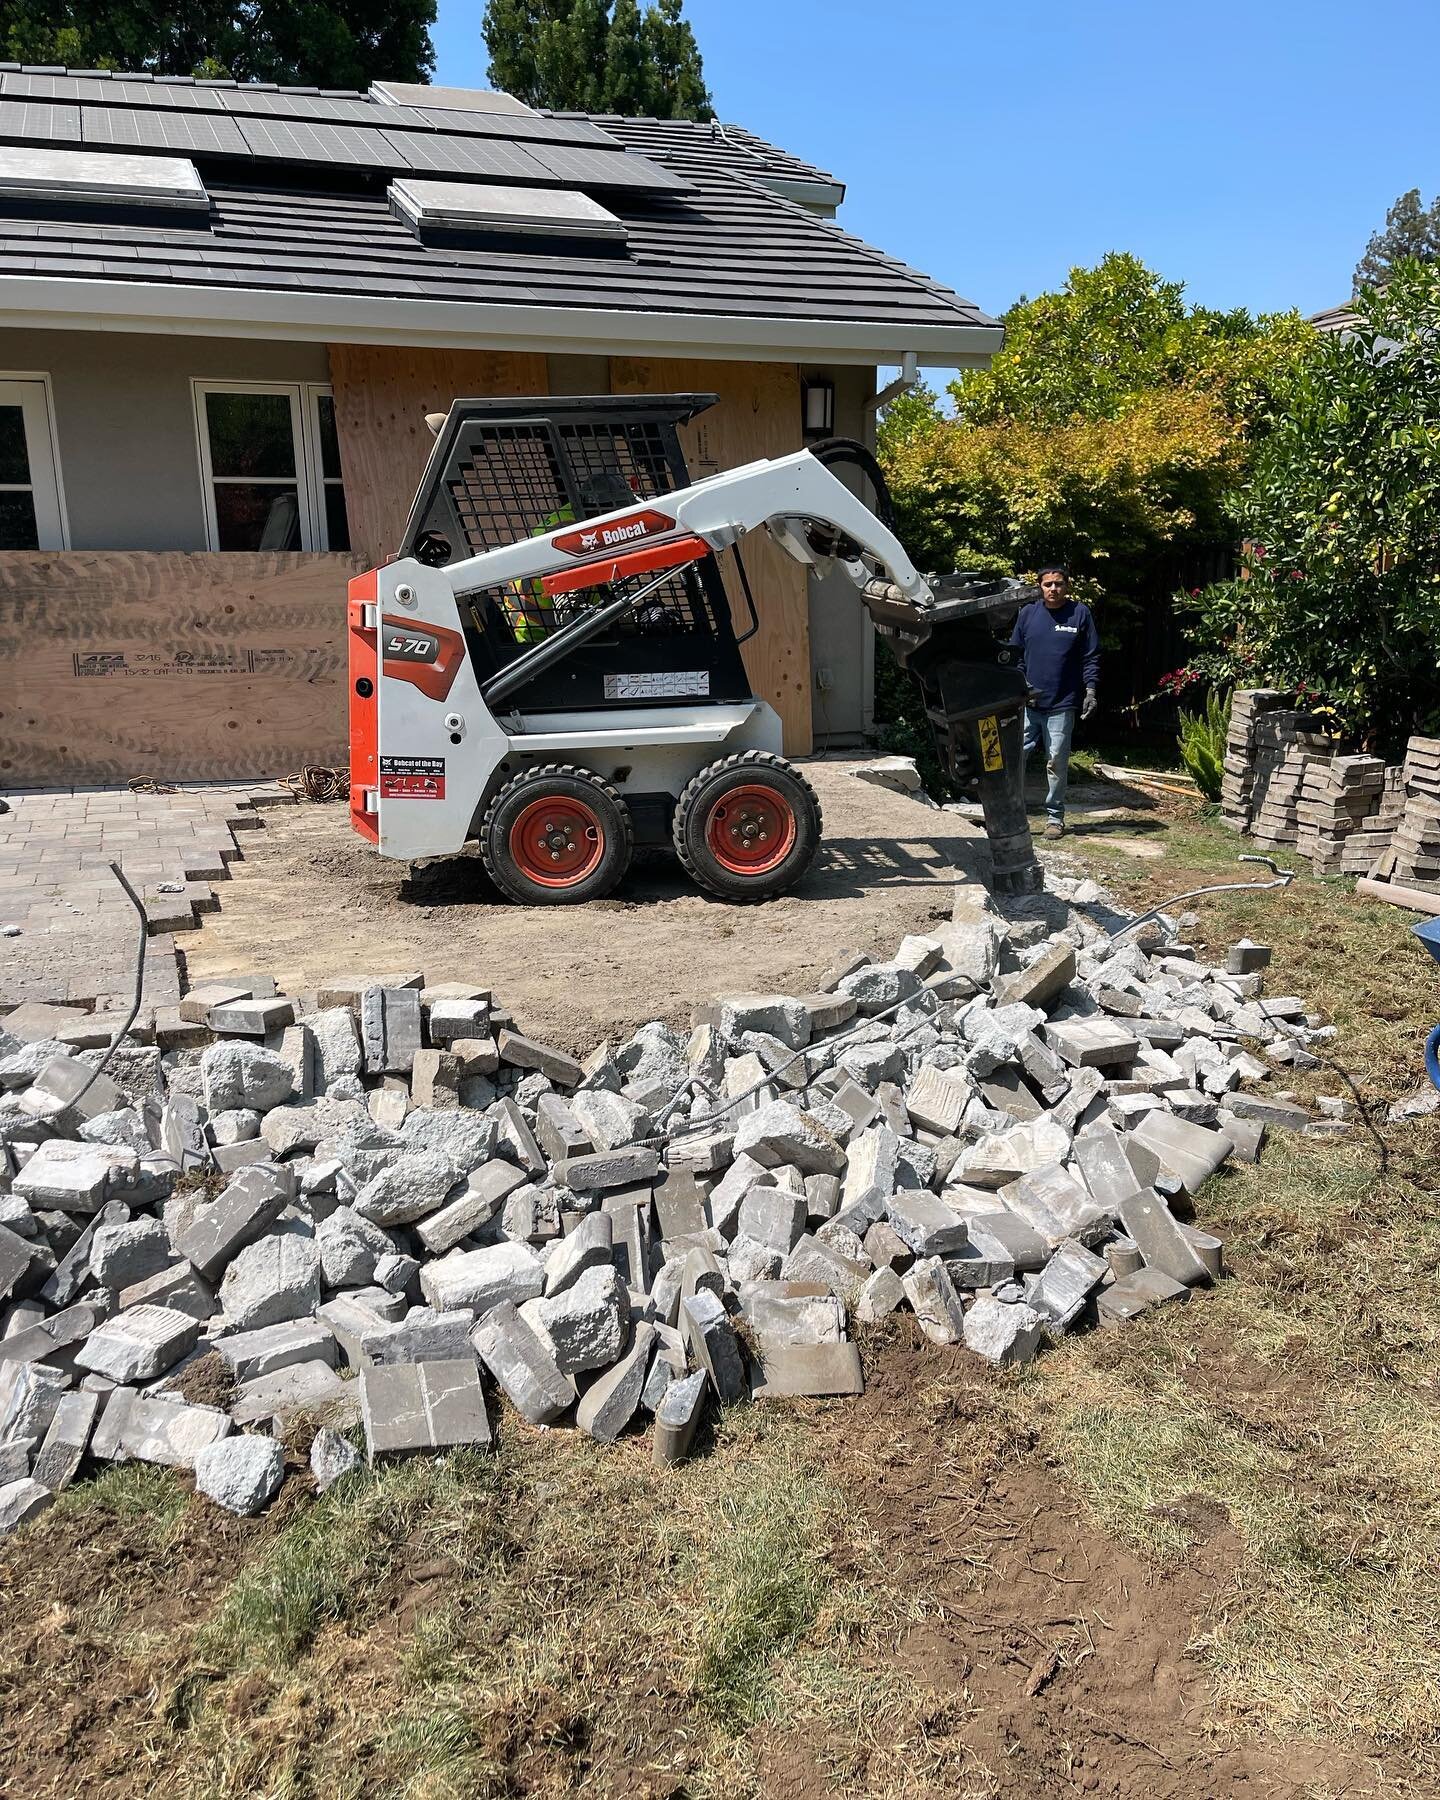 ...and the demo begins at our new project in Los Altos, CA 🚧
&bull;
&bull;
&bull;
#landscapearchitecture #firepit #dreamhome #beforeandafter #landscapedesign #contemporarydesign #beauty #landscapeconstruction #californialandscape #construction #cust